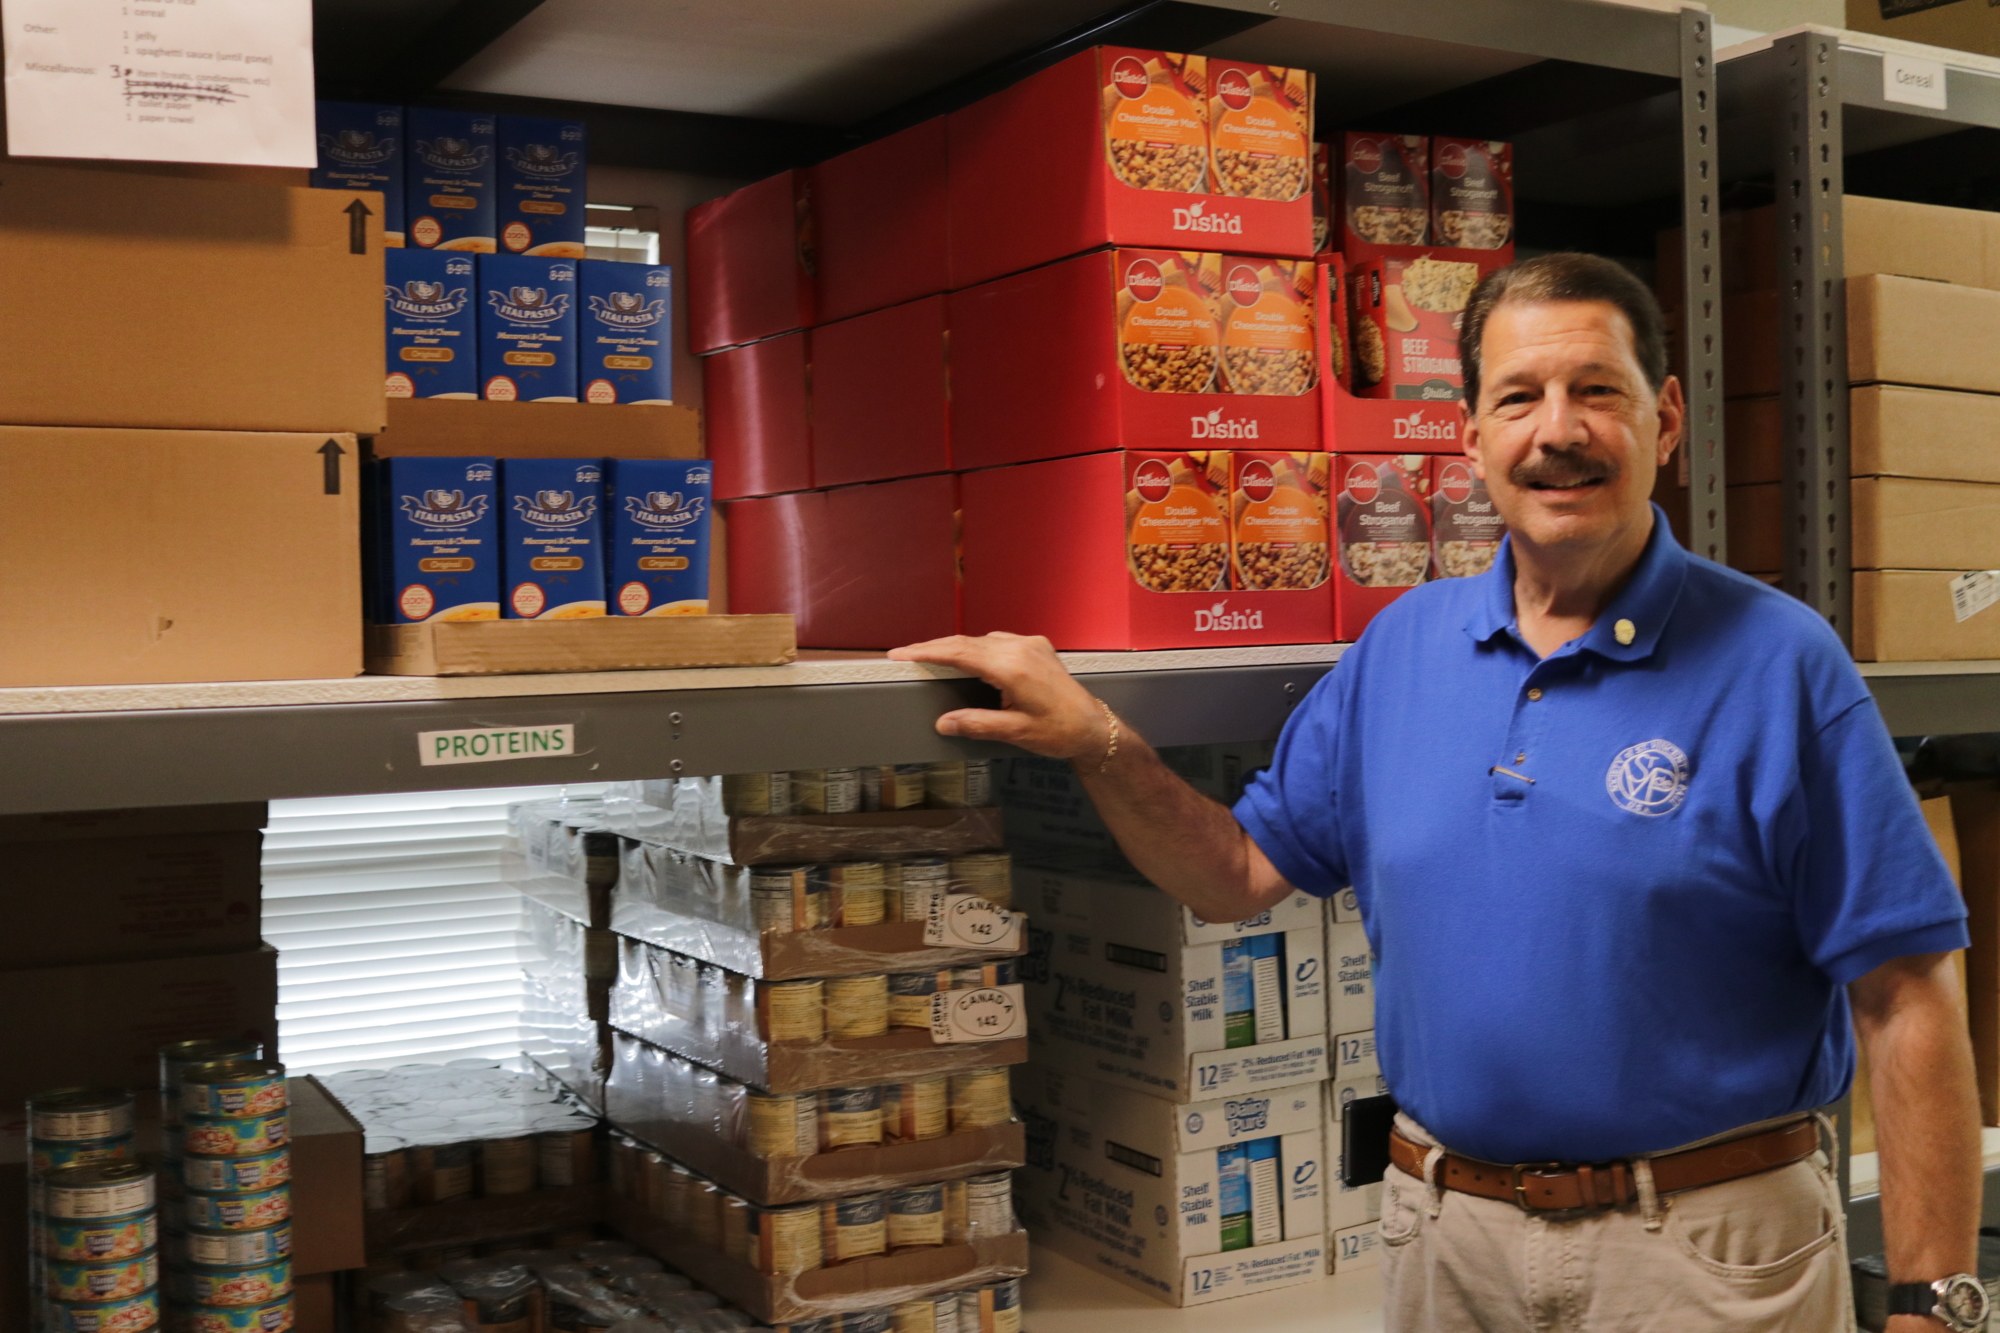 Joe Mazloom is the president of the Society of St. Vincent de Paul at Holy Family Catholic Church. The society provides much-needed services to the poor in Orange County, including distributing food from its food pantry.